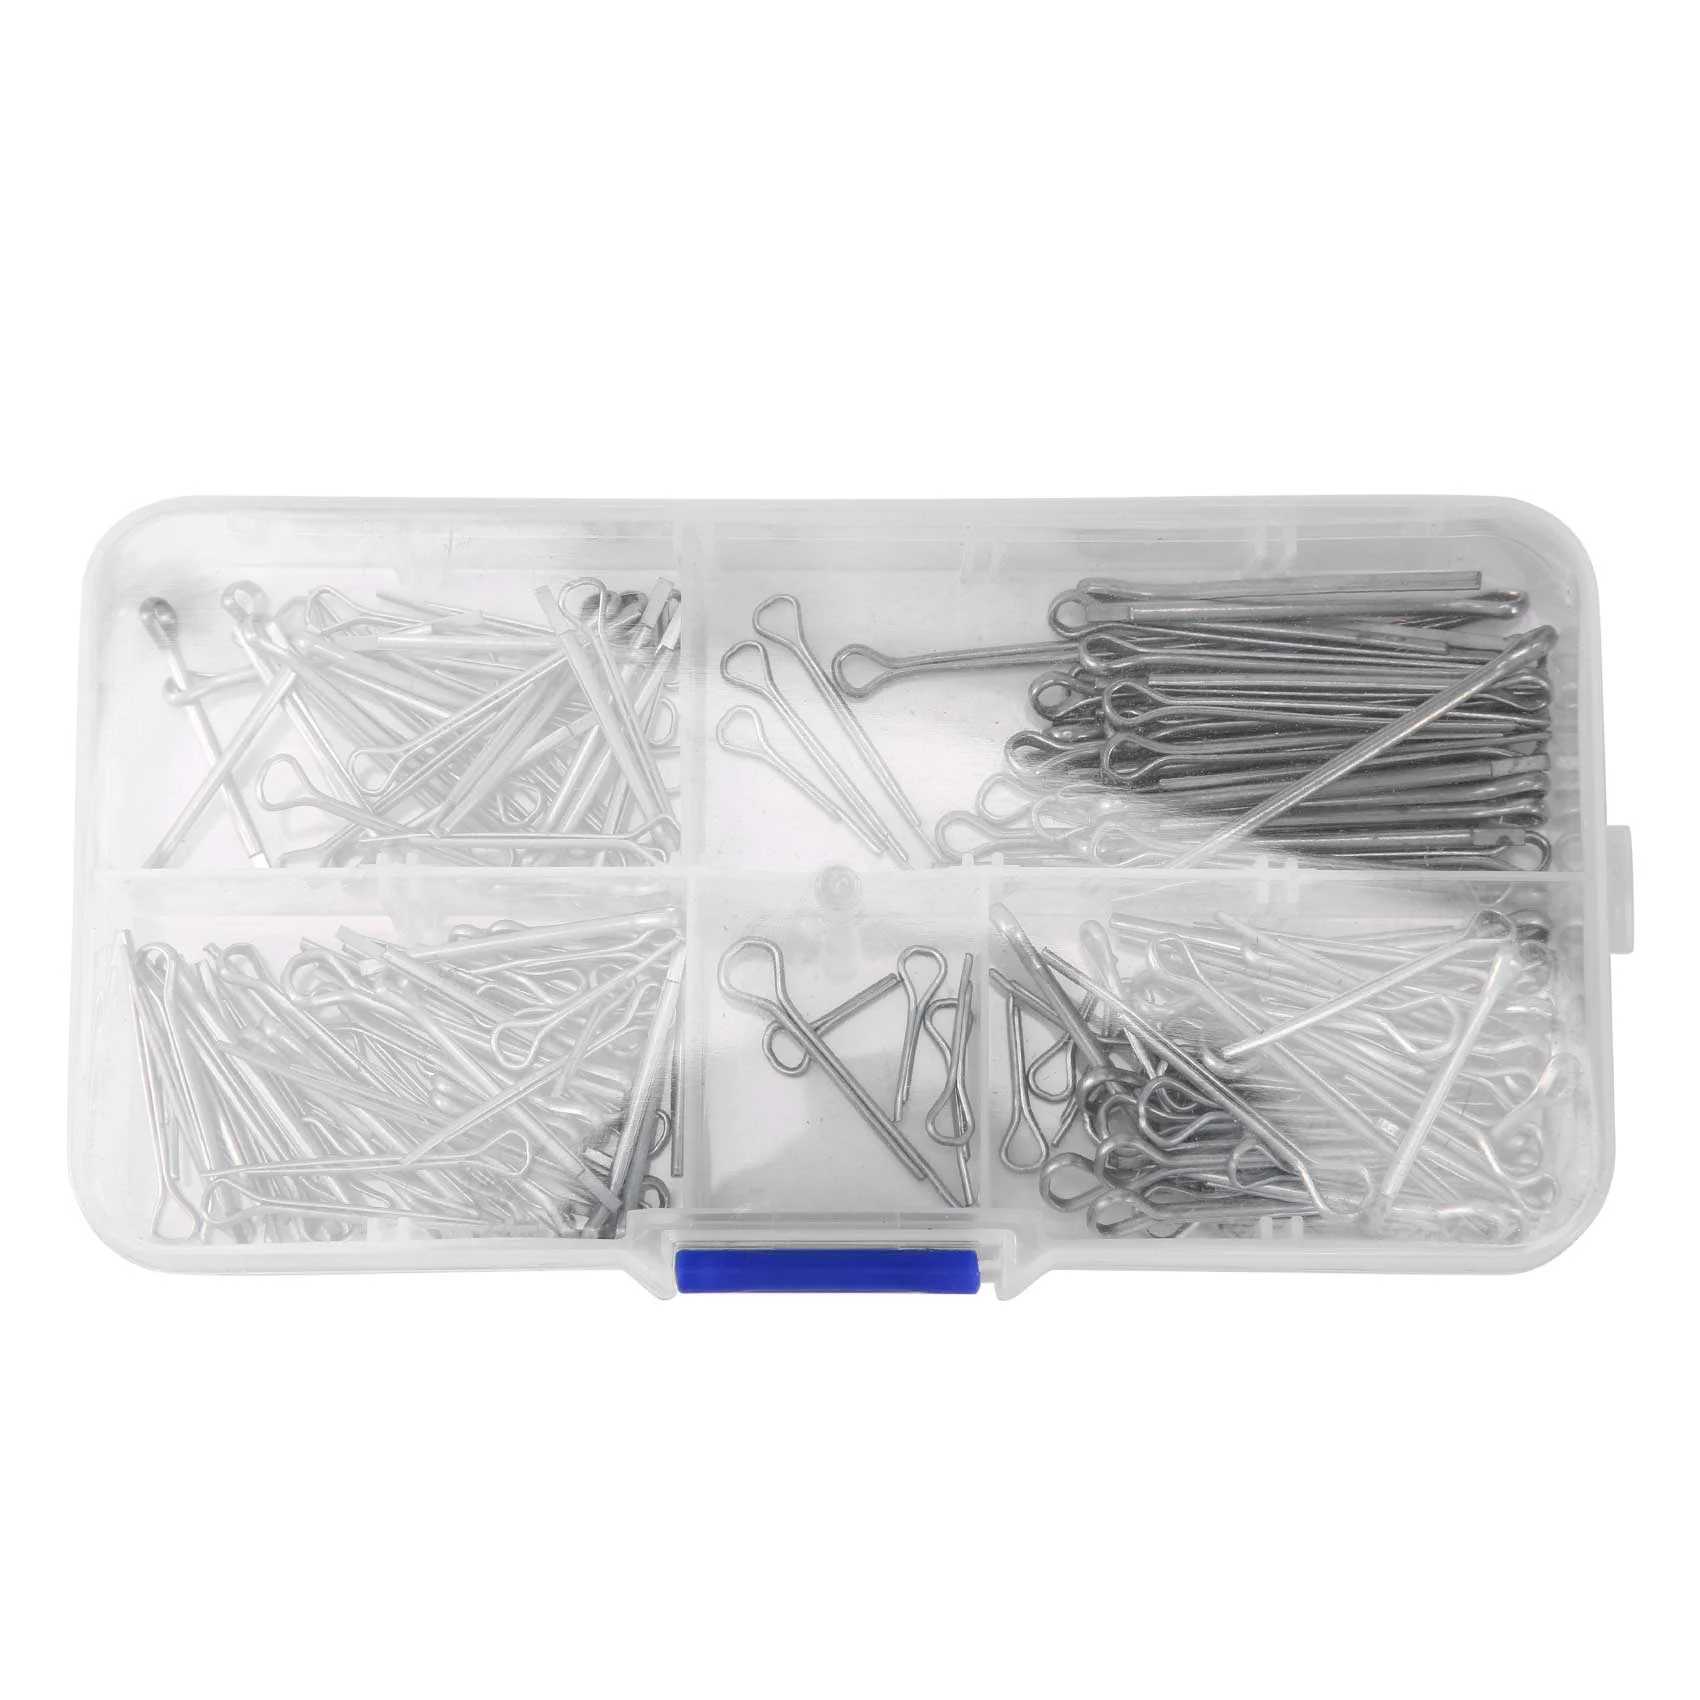 

175Pc SPLIT PINS Cotter Fixings Set Assorted Sizes Zinc Plated Steel Hard Case